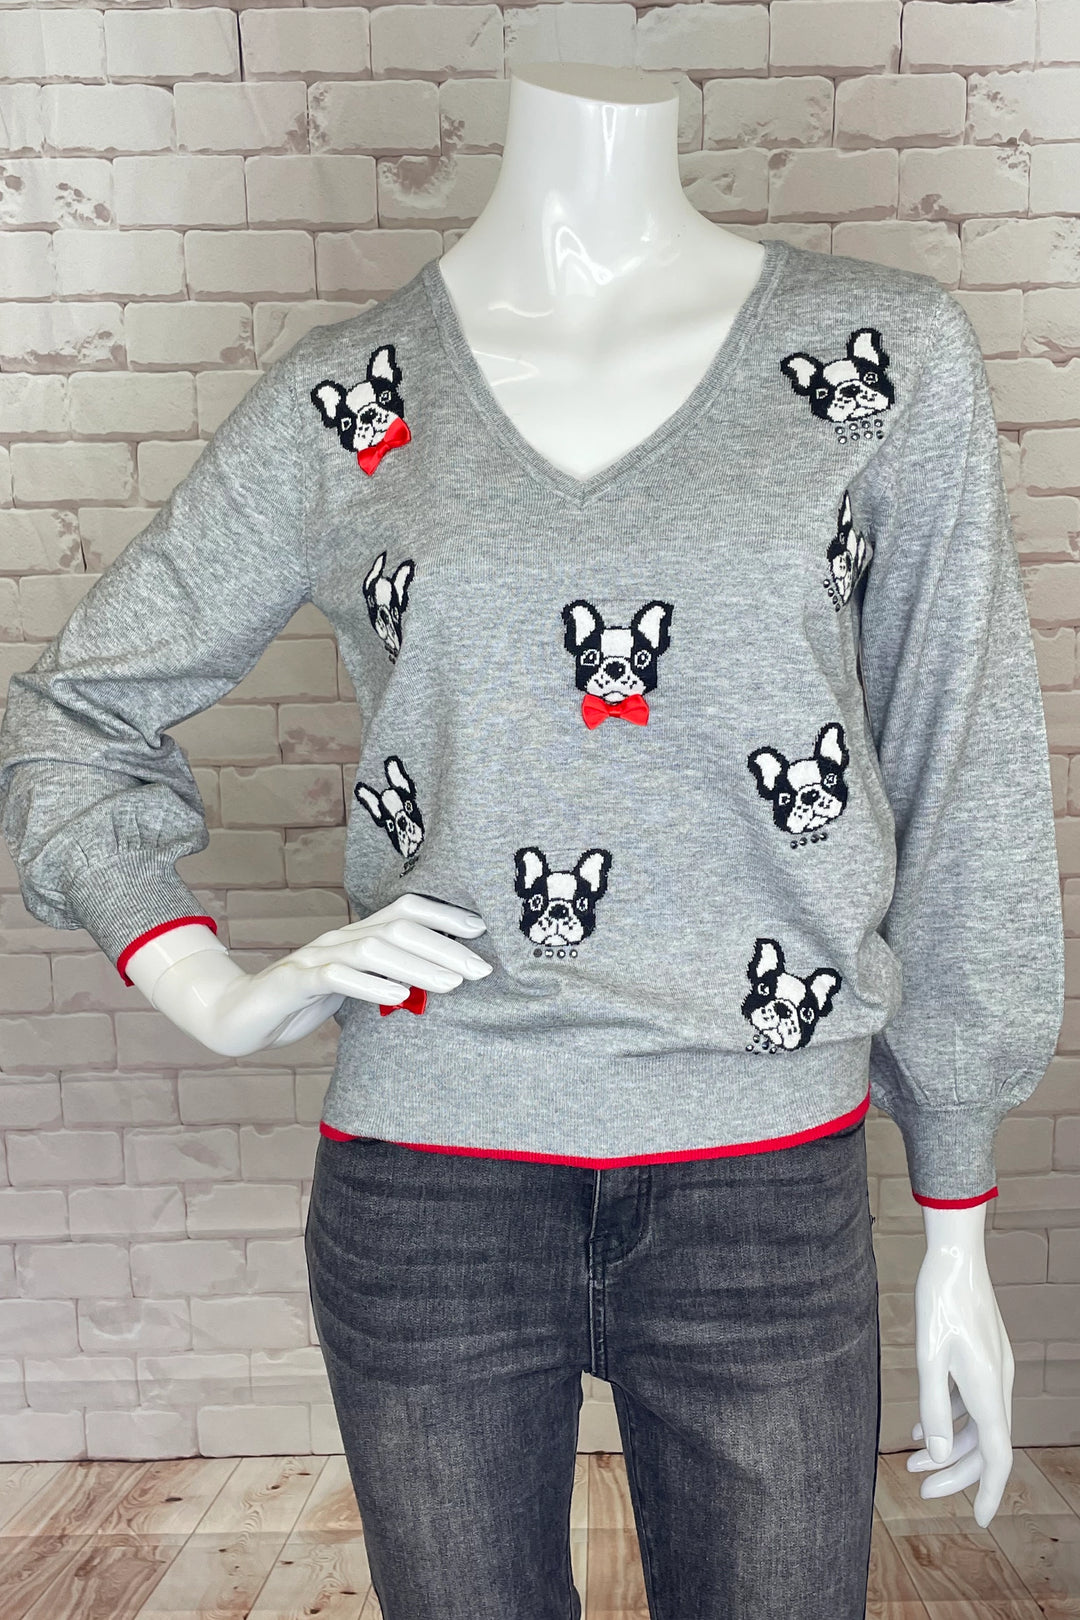 Our Frenchie Long Sleeve V-neck features an adorable doggie print all-over, some with cute bow ties and others with some bling!